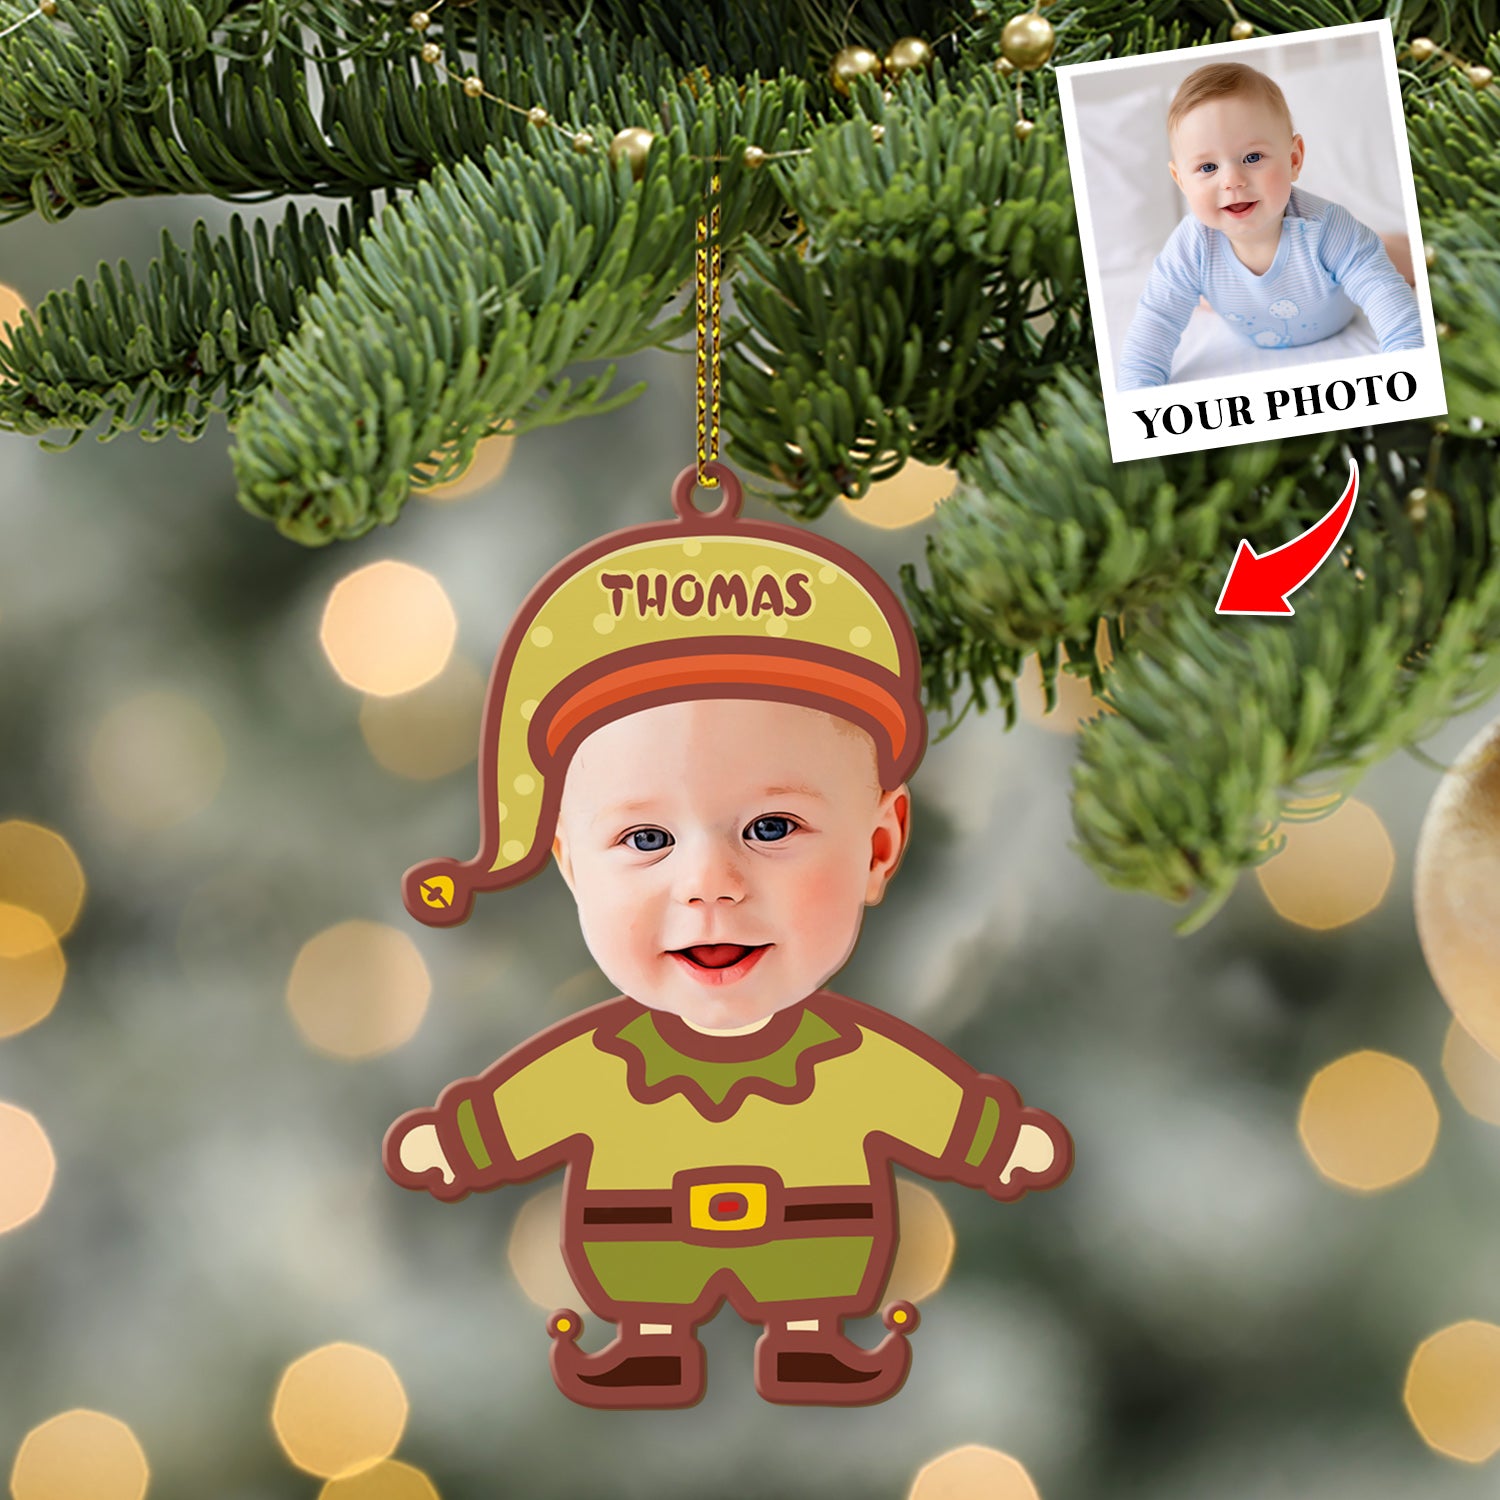 Face From Photo, Ornament For Baby, Goblin Christmas, Personalized Name And Text, Christmas Shape Ornament 2 Sides